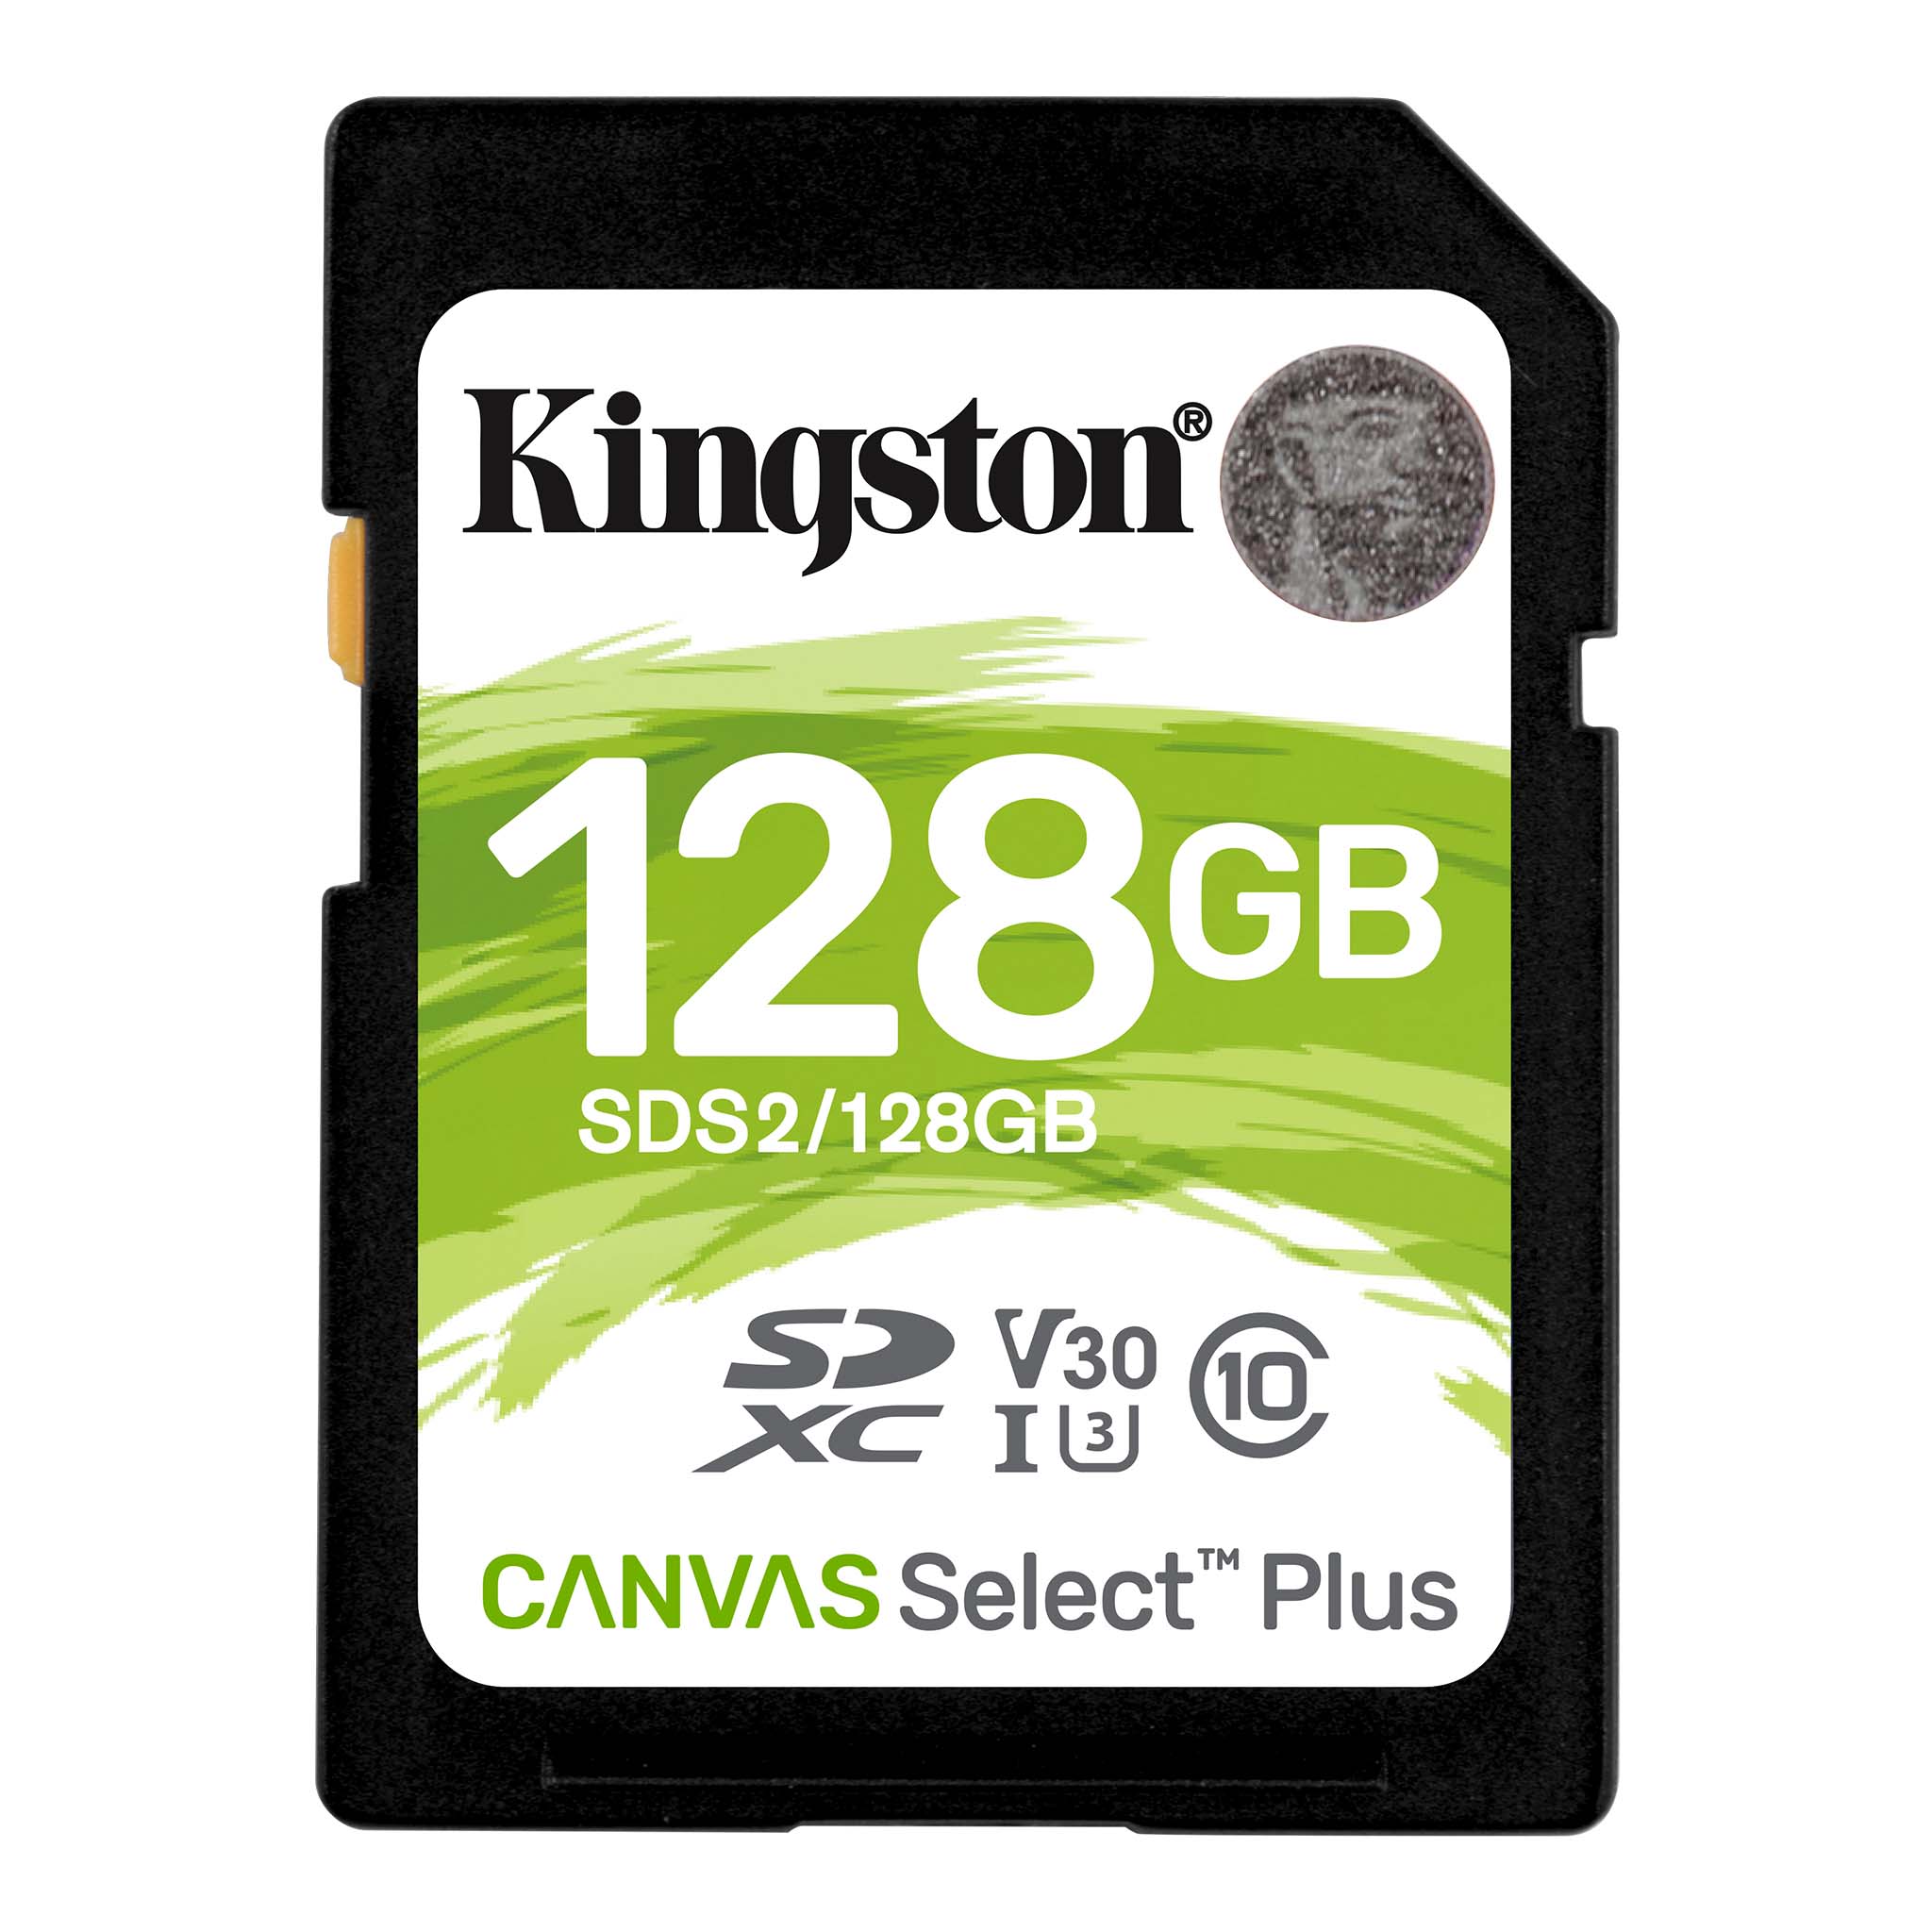 100MBs Works with Kingston Kingston 512GB Samsung Galaxy Tab A 8.0 2017 MicroSDXC Canvas Select Plus Card Verified by SanFlash. 